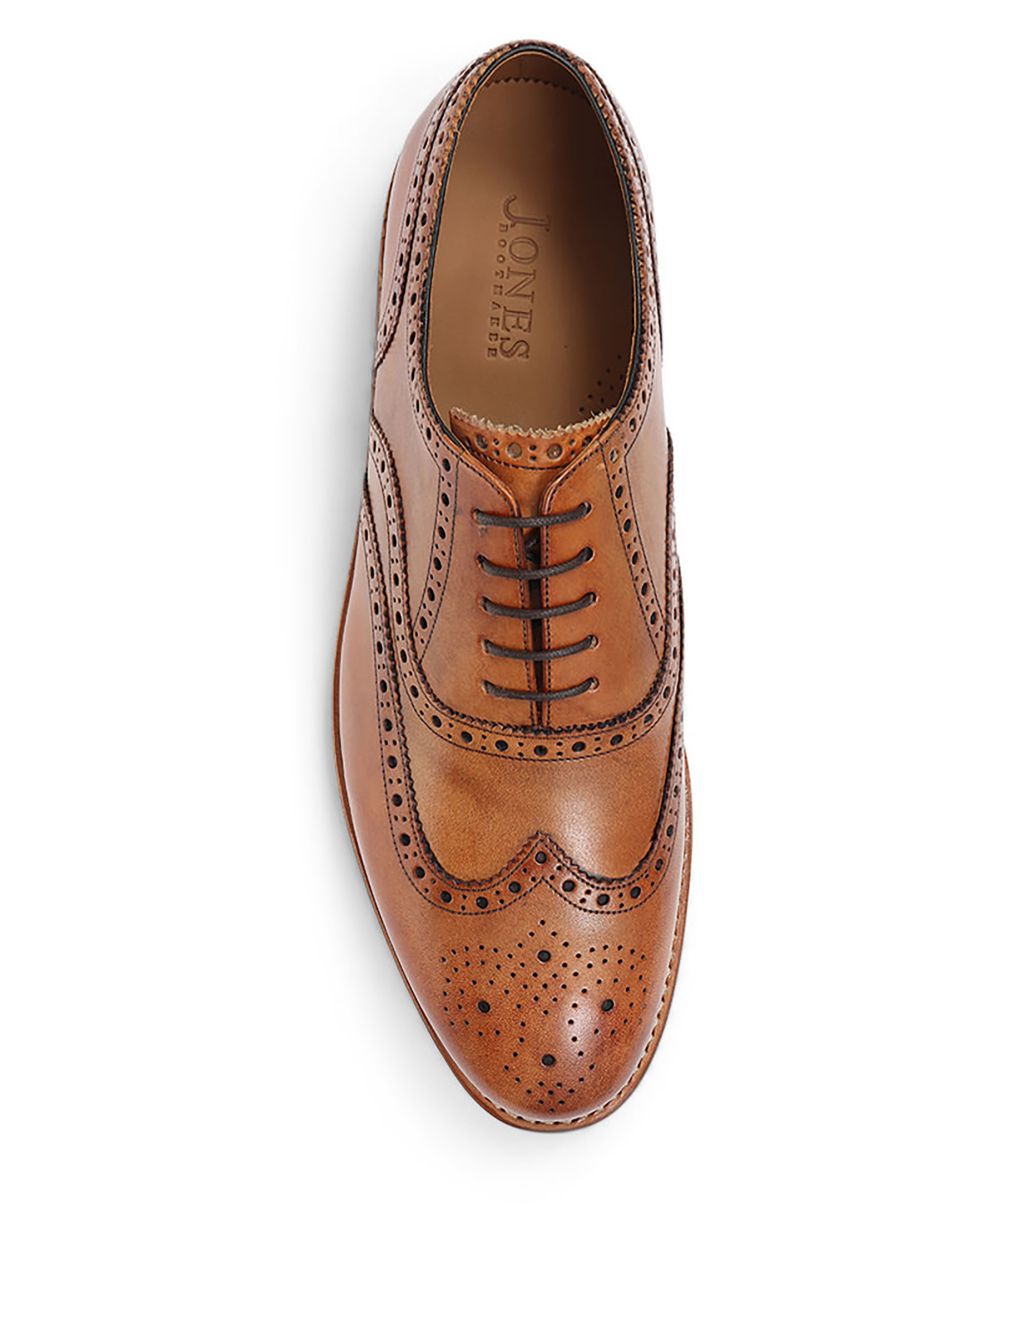 Leather Brogues image 5